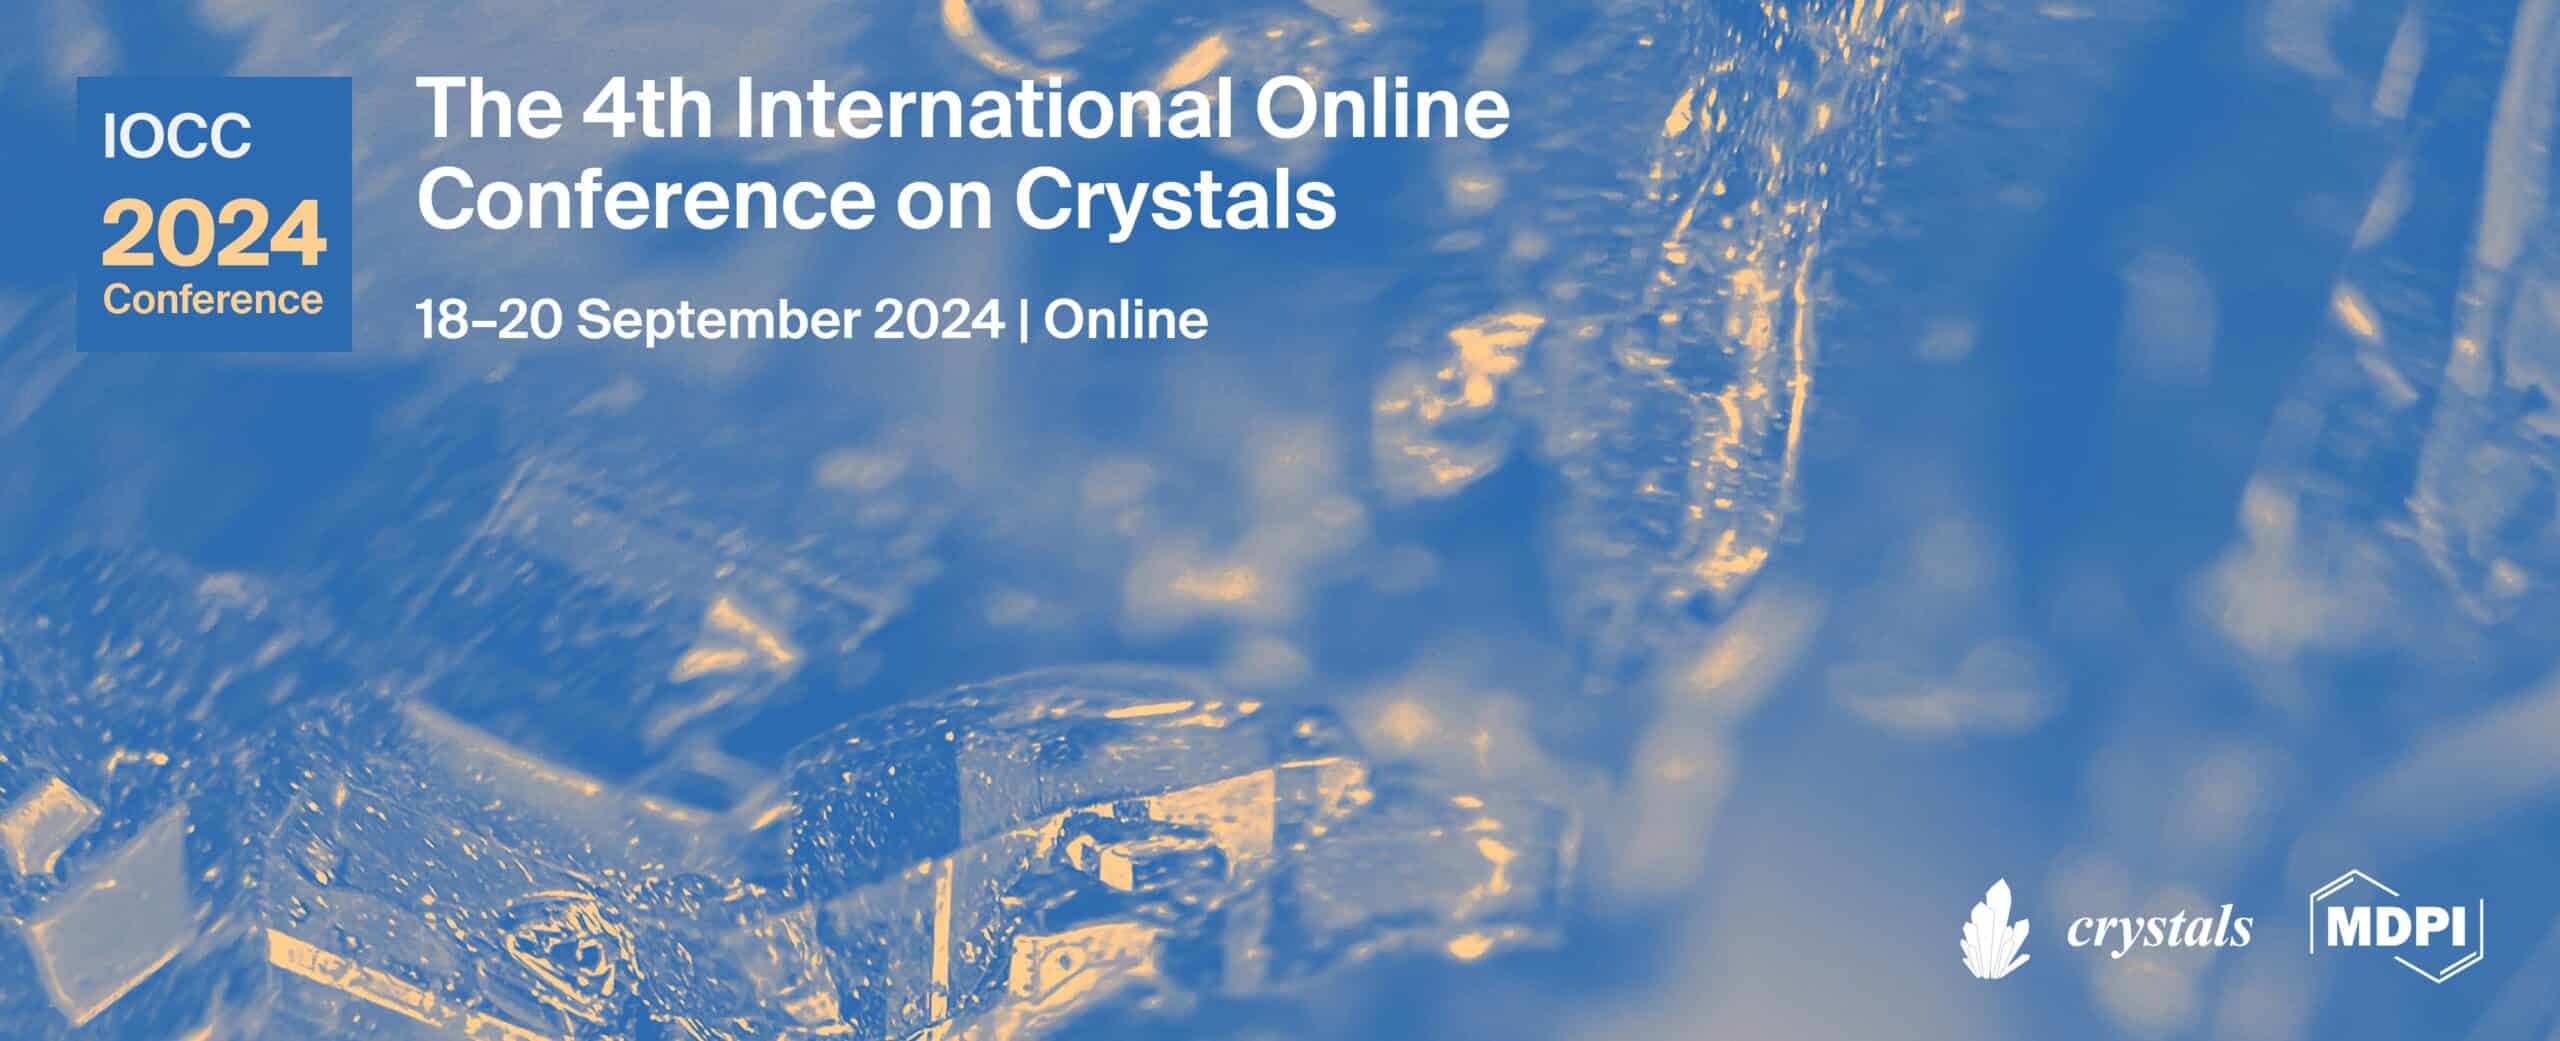 The 4th International Online Conference on Crystals